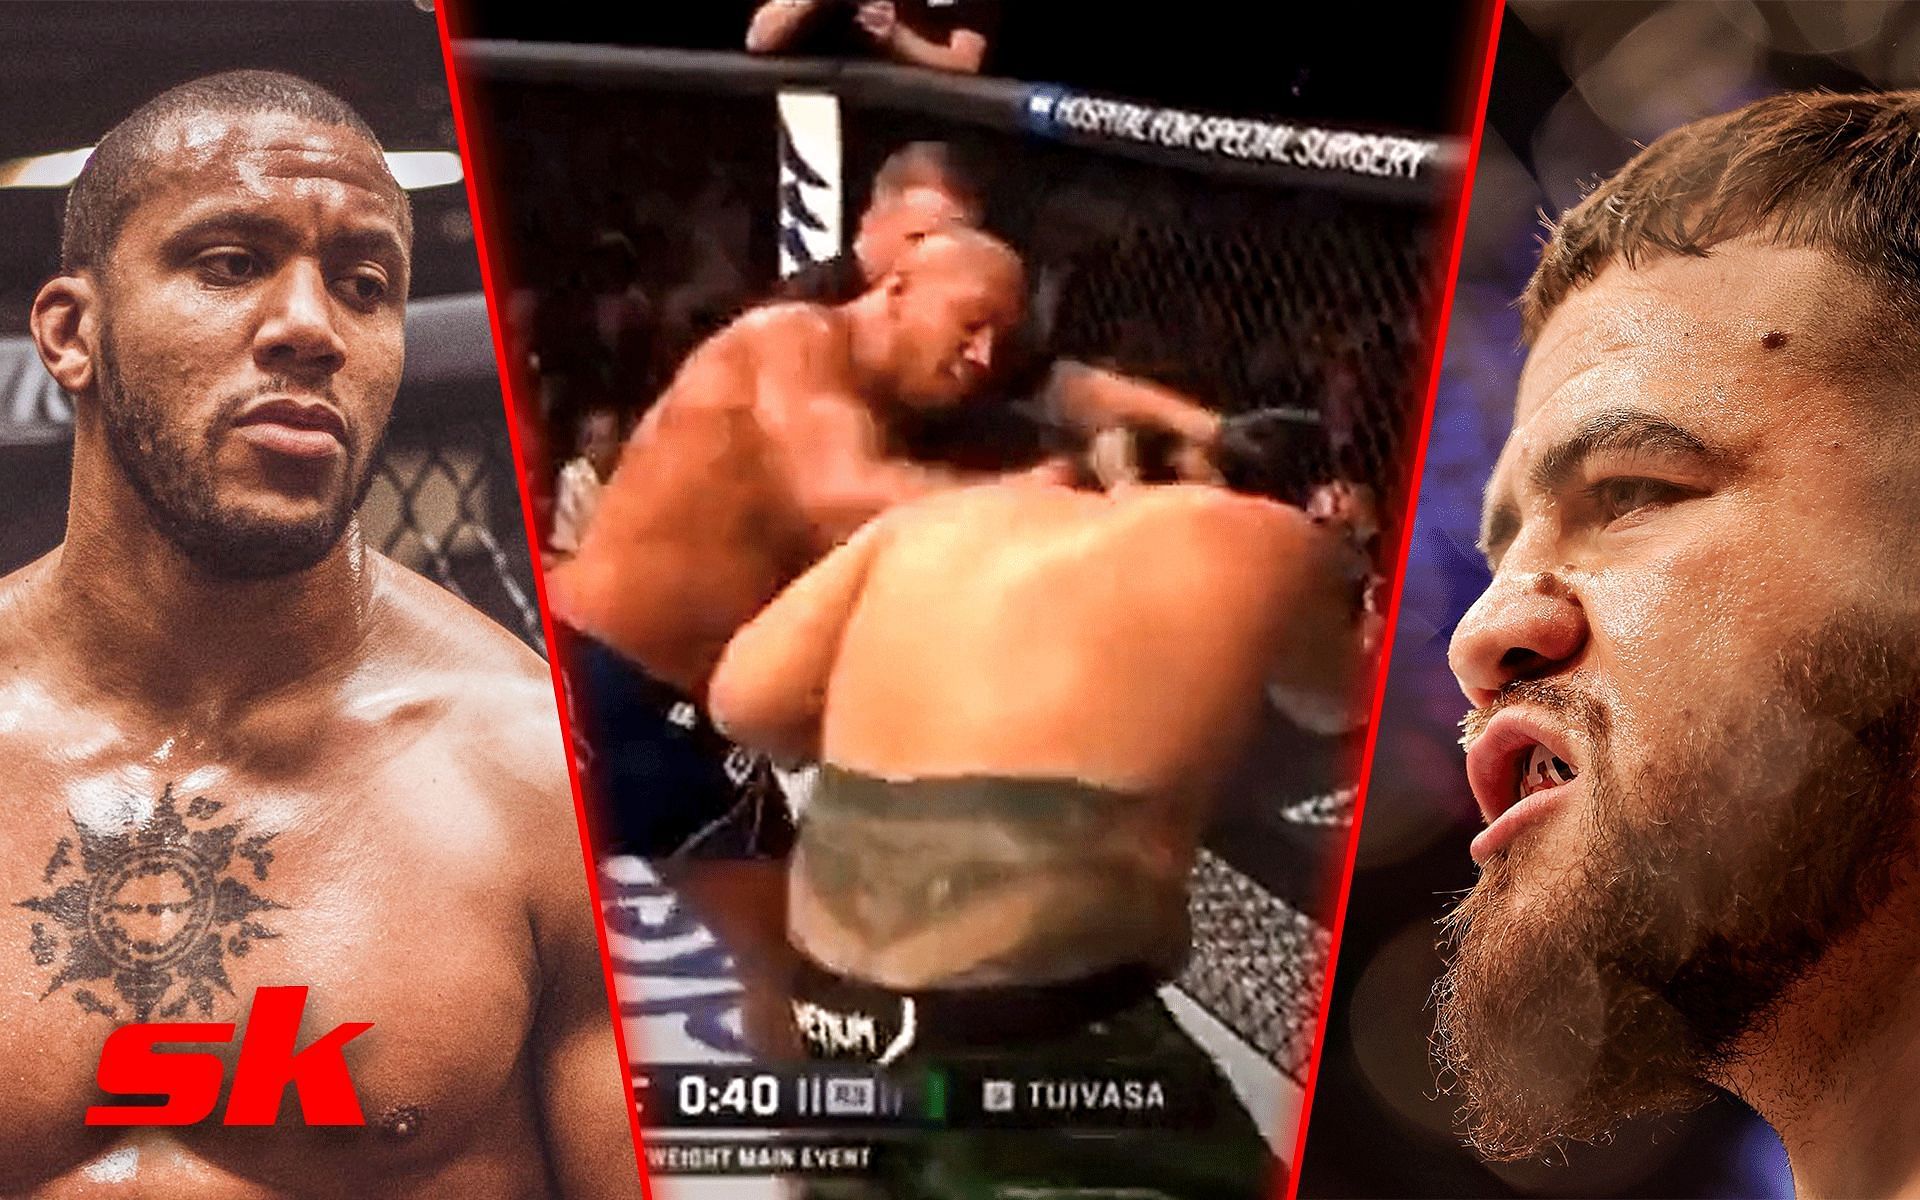 Ciryl Gane (left), UFC Paris main event (center), and Tai Tuivasa (right). [Images courtesy: left from Instagram @Ciryl_Gane, center from Twitter @junior_cigano, right from Getty Images]